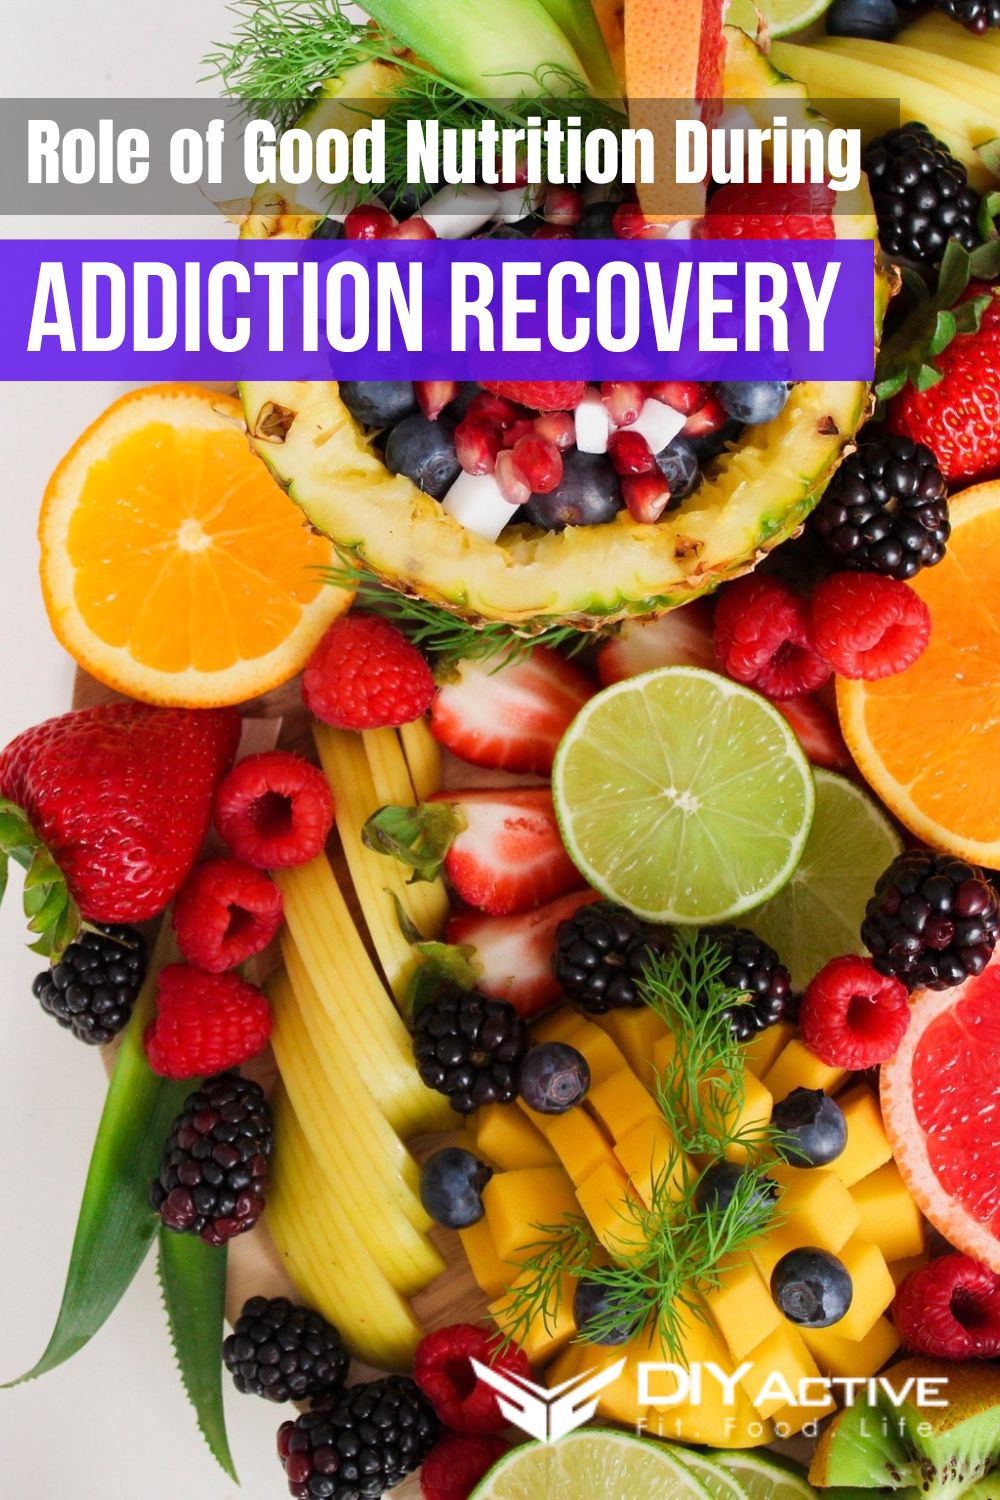 The Role of Good Nutrition During Addiction Recovery